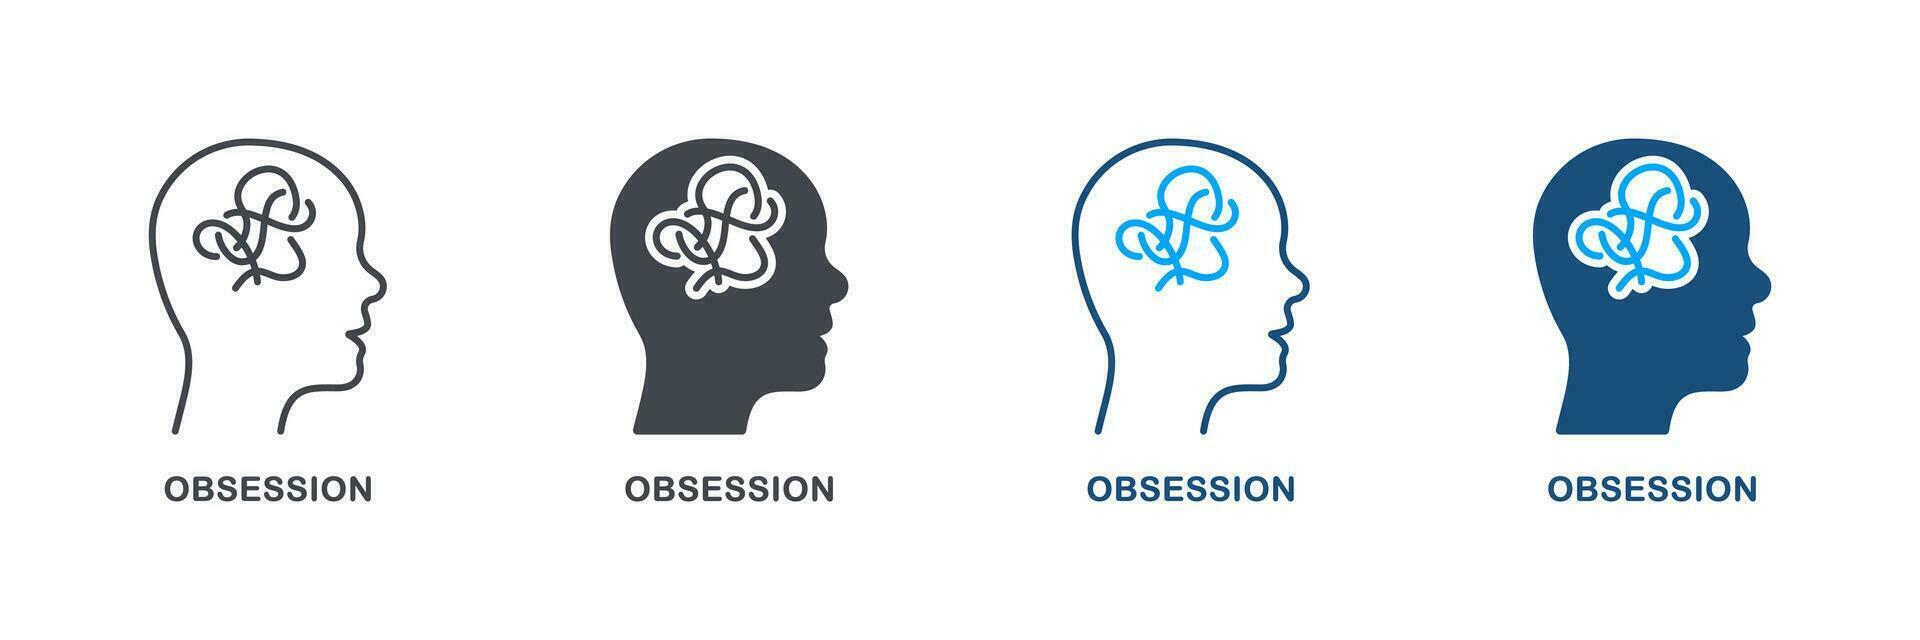 Mental Obsession in Human Head Silhouette and Line Icon Set. Brainstorm, Depression, Chaos Pictogram. Person Mind Disorder Symbol Collection. Intellectual Process. Isolated Vector Illustration.